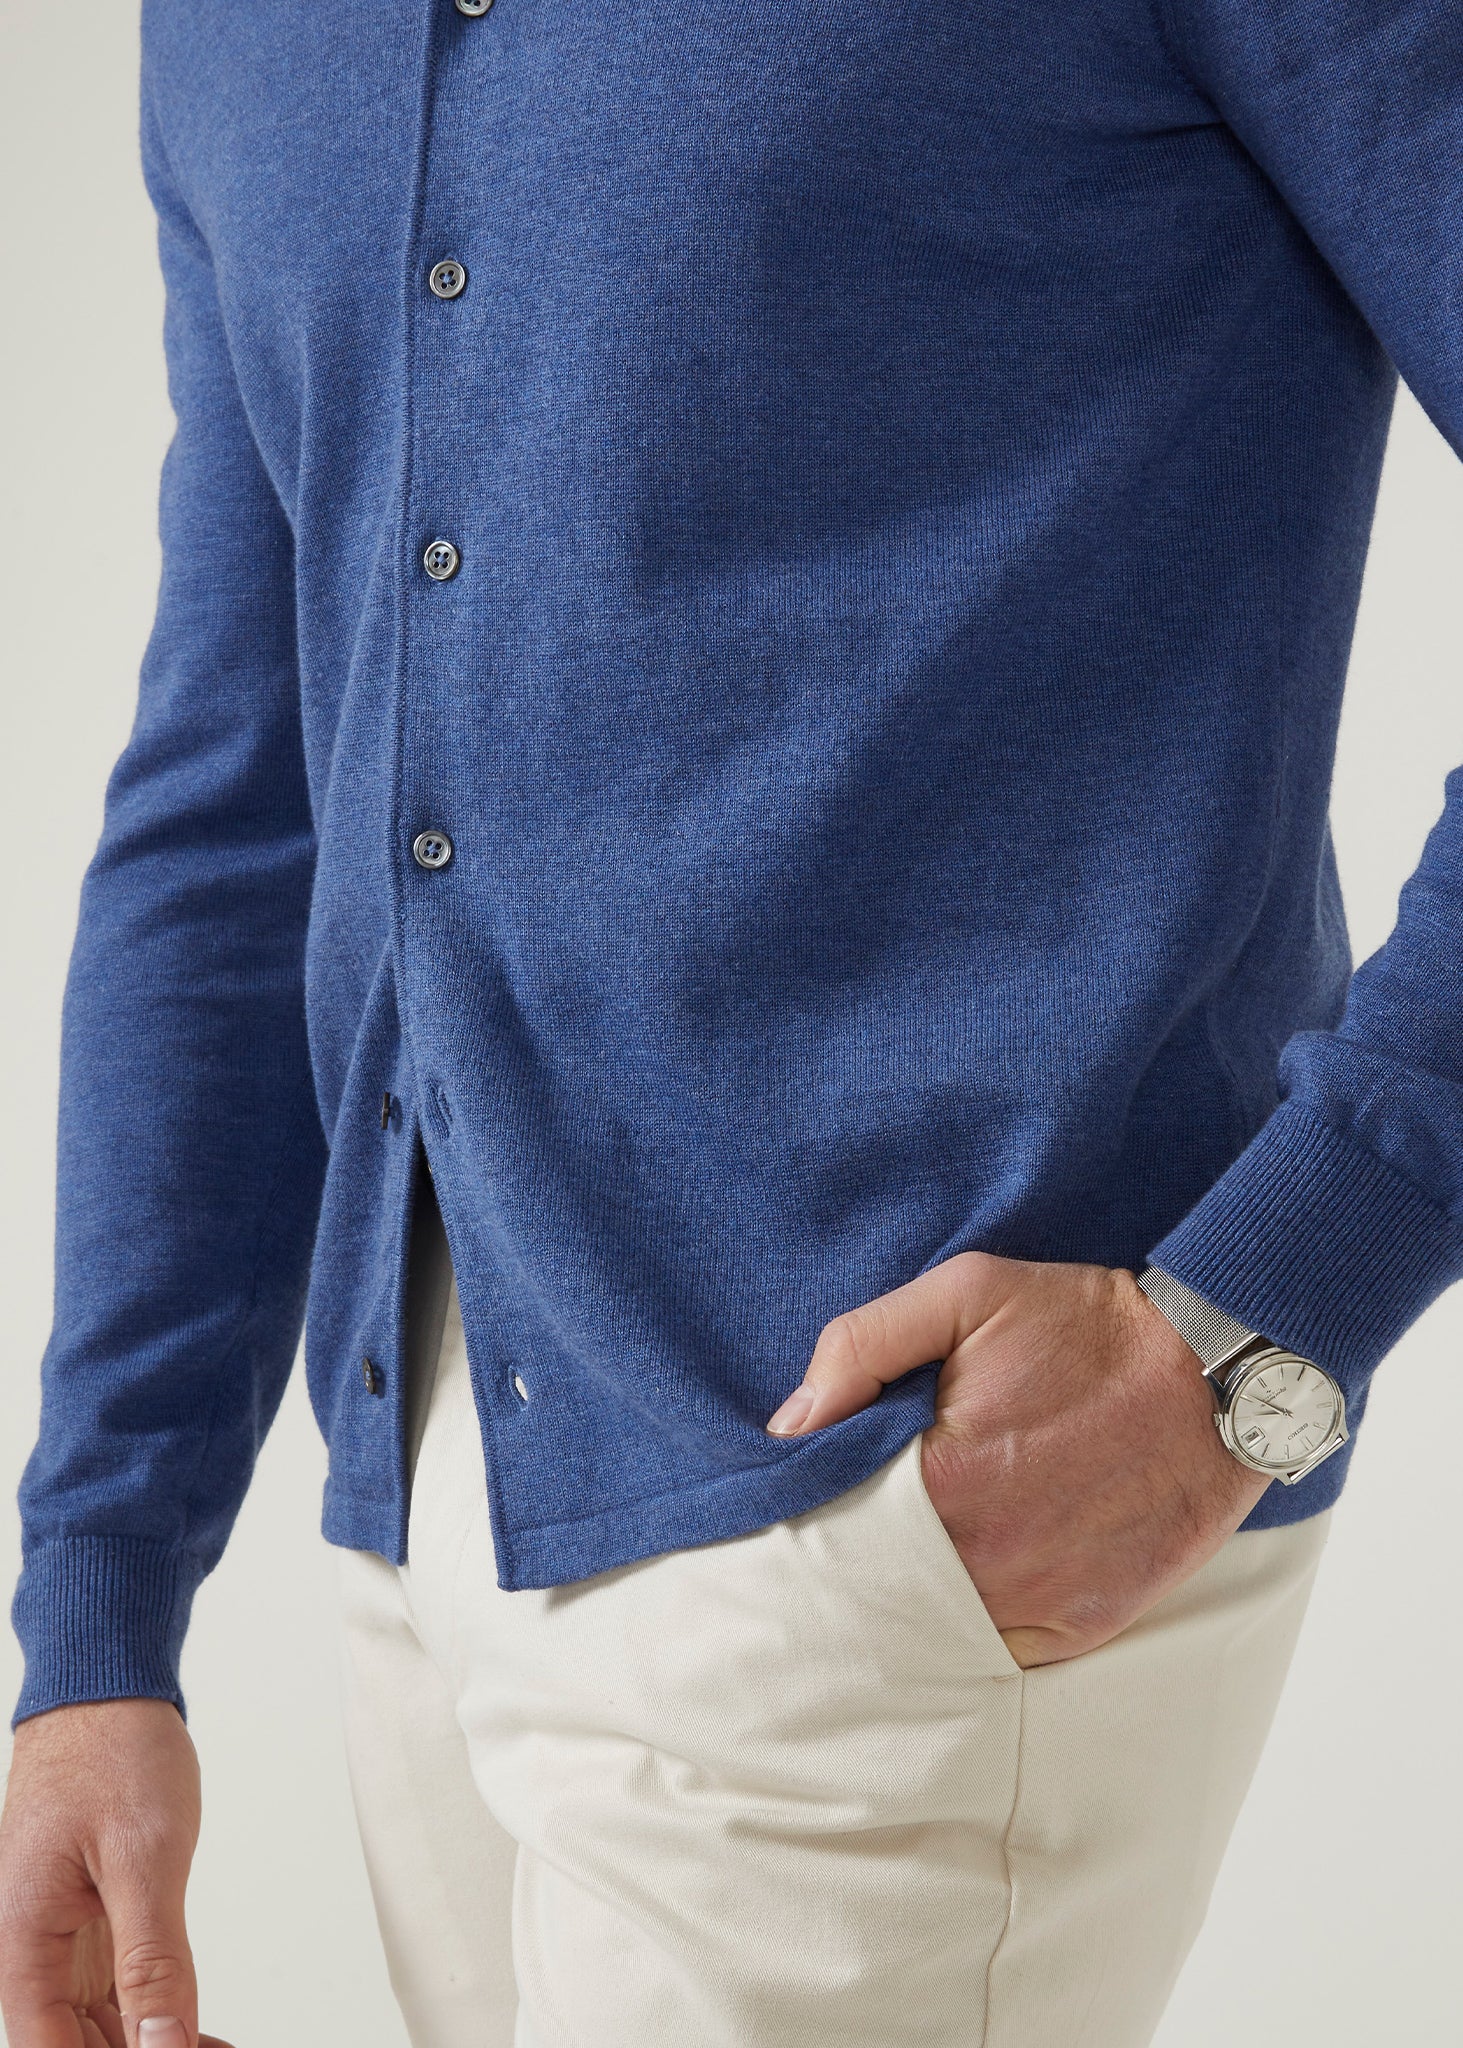 Long sleeve buttoned front shirt made with cotton cashmere in indigo blue.